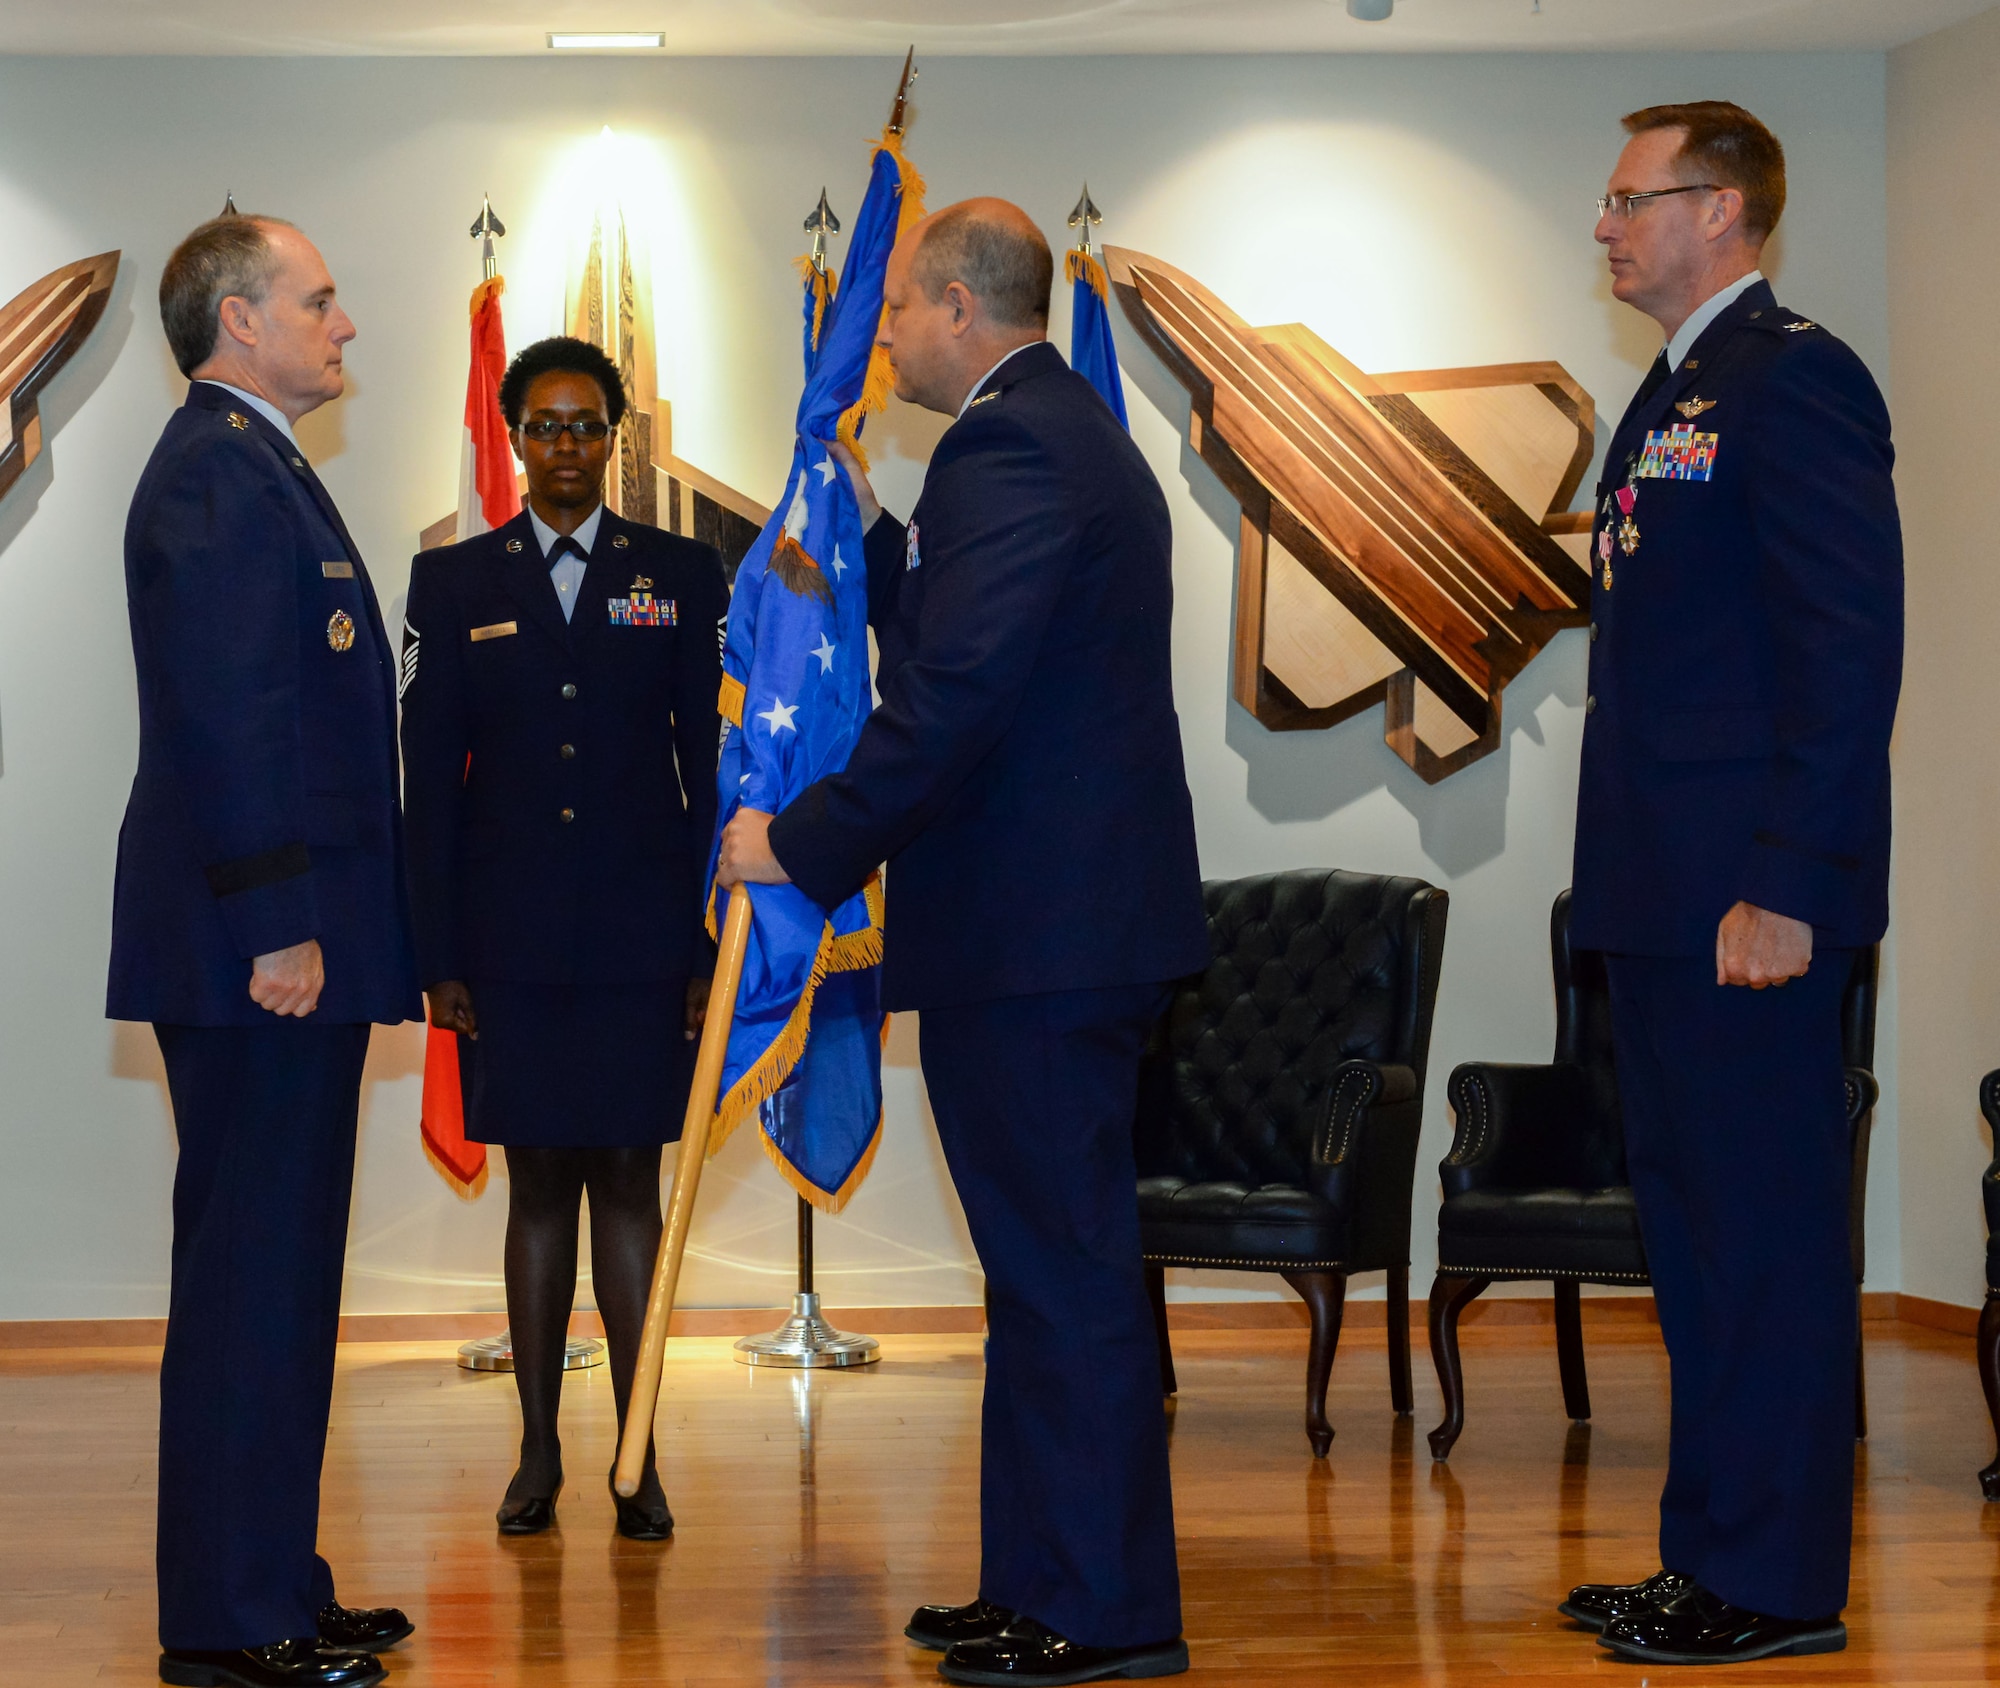 Col. Clayton Schaefer, 601st Air Operations Center commander, receives the ceremonial flag from Lt. Gen. Kirk Pierce, Continental U.S. North American Aerospace Defense Command Region – 1st Air Force (Air Forces Northern and Air Forces Space) commander, during the 601st AOC change of command ceremony at Tyndall Air Force Base, Florida on June 1, 2022.  The passing of the flag symbolizes Schaefer's acceptance of command of the 601st AOC. (Air National Guard photo by Master Sgt. Regina Young)